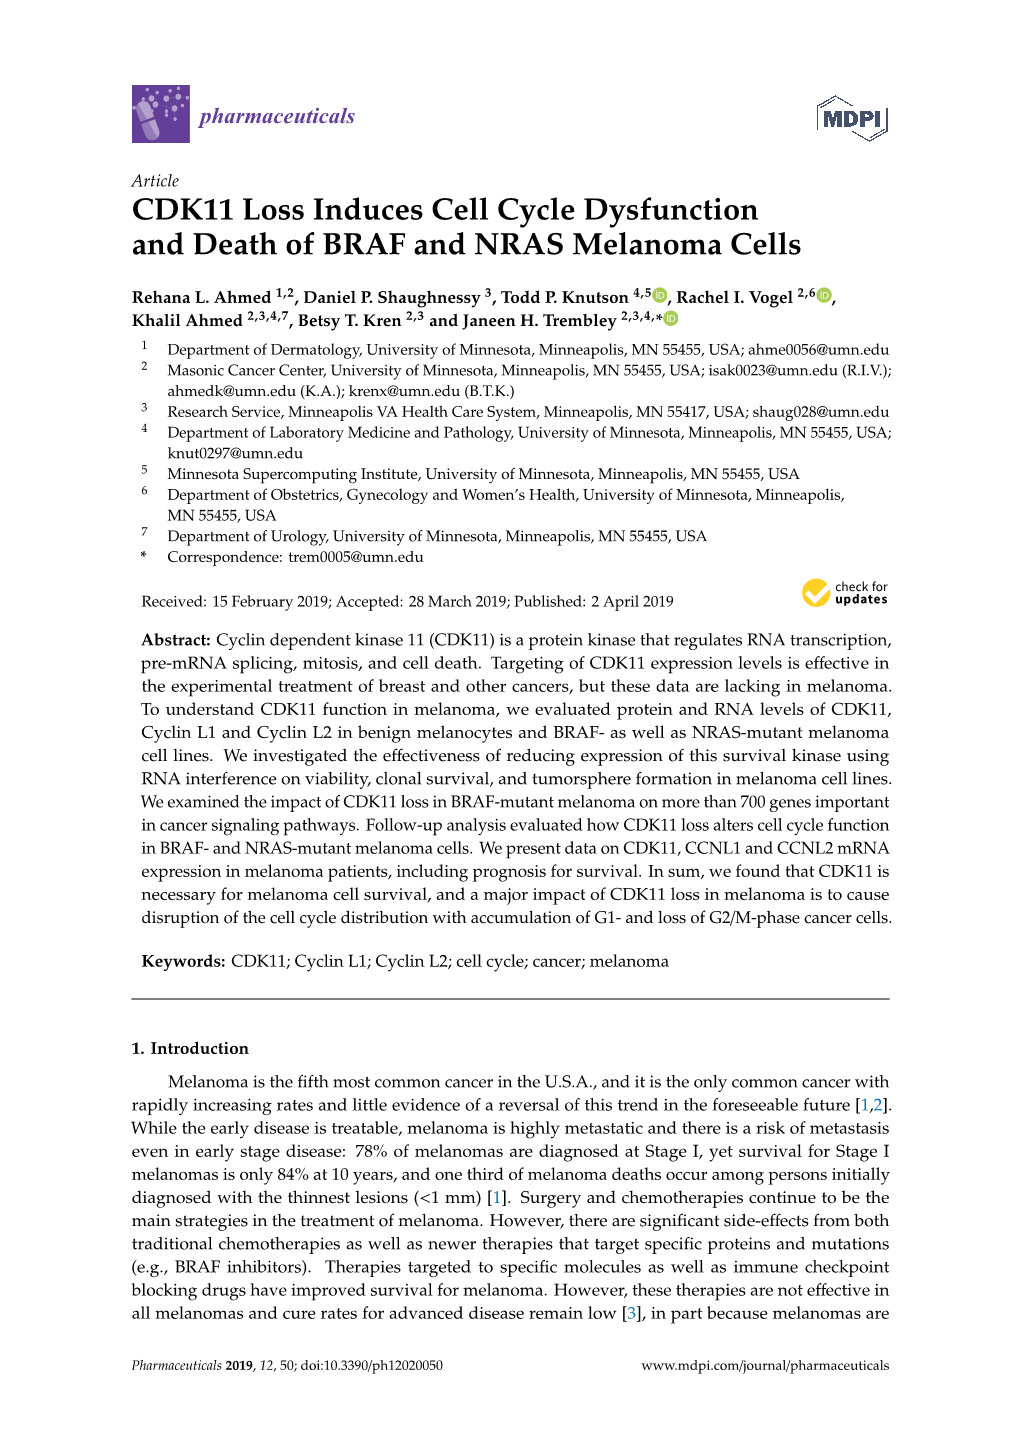 CDK11 Loss Induces Cell Cycle Dysfunction and Death of BRAF and NRAS Melanoma Cells